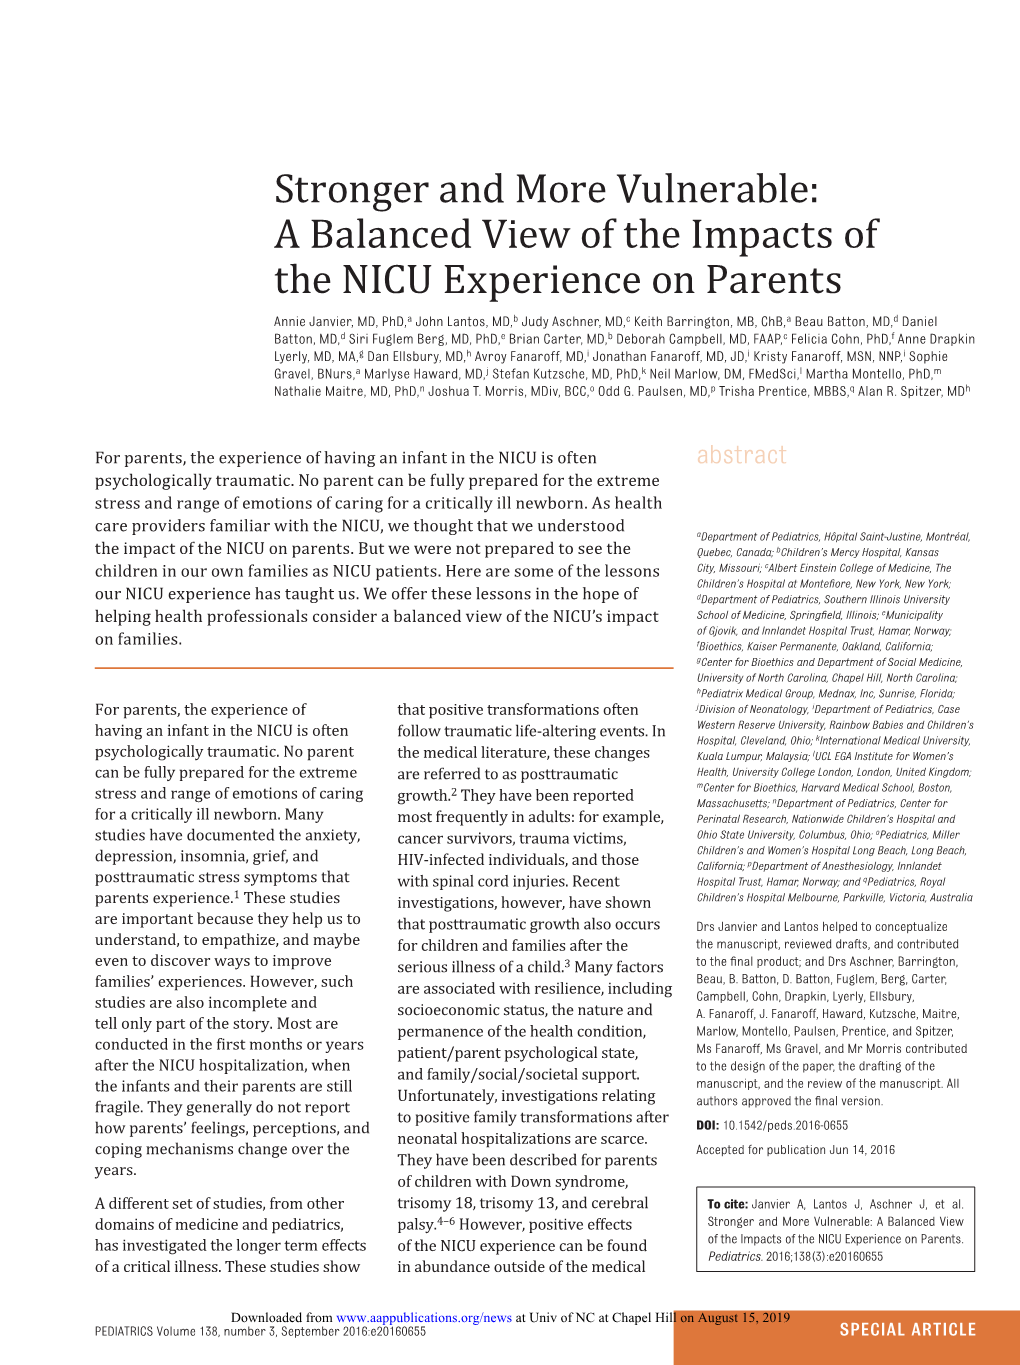 Stronger and More Vulnerable: a Balanced View of the Impacts of the NICU Experience on Parents